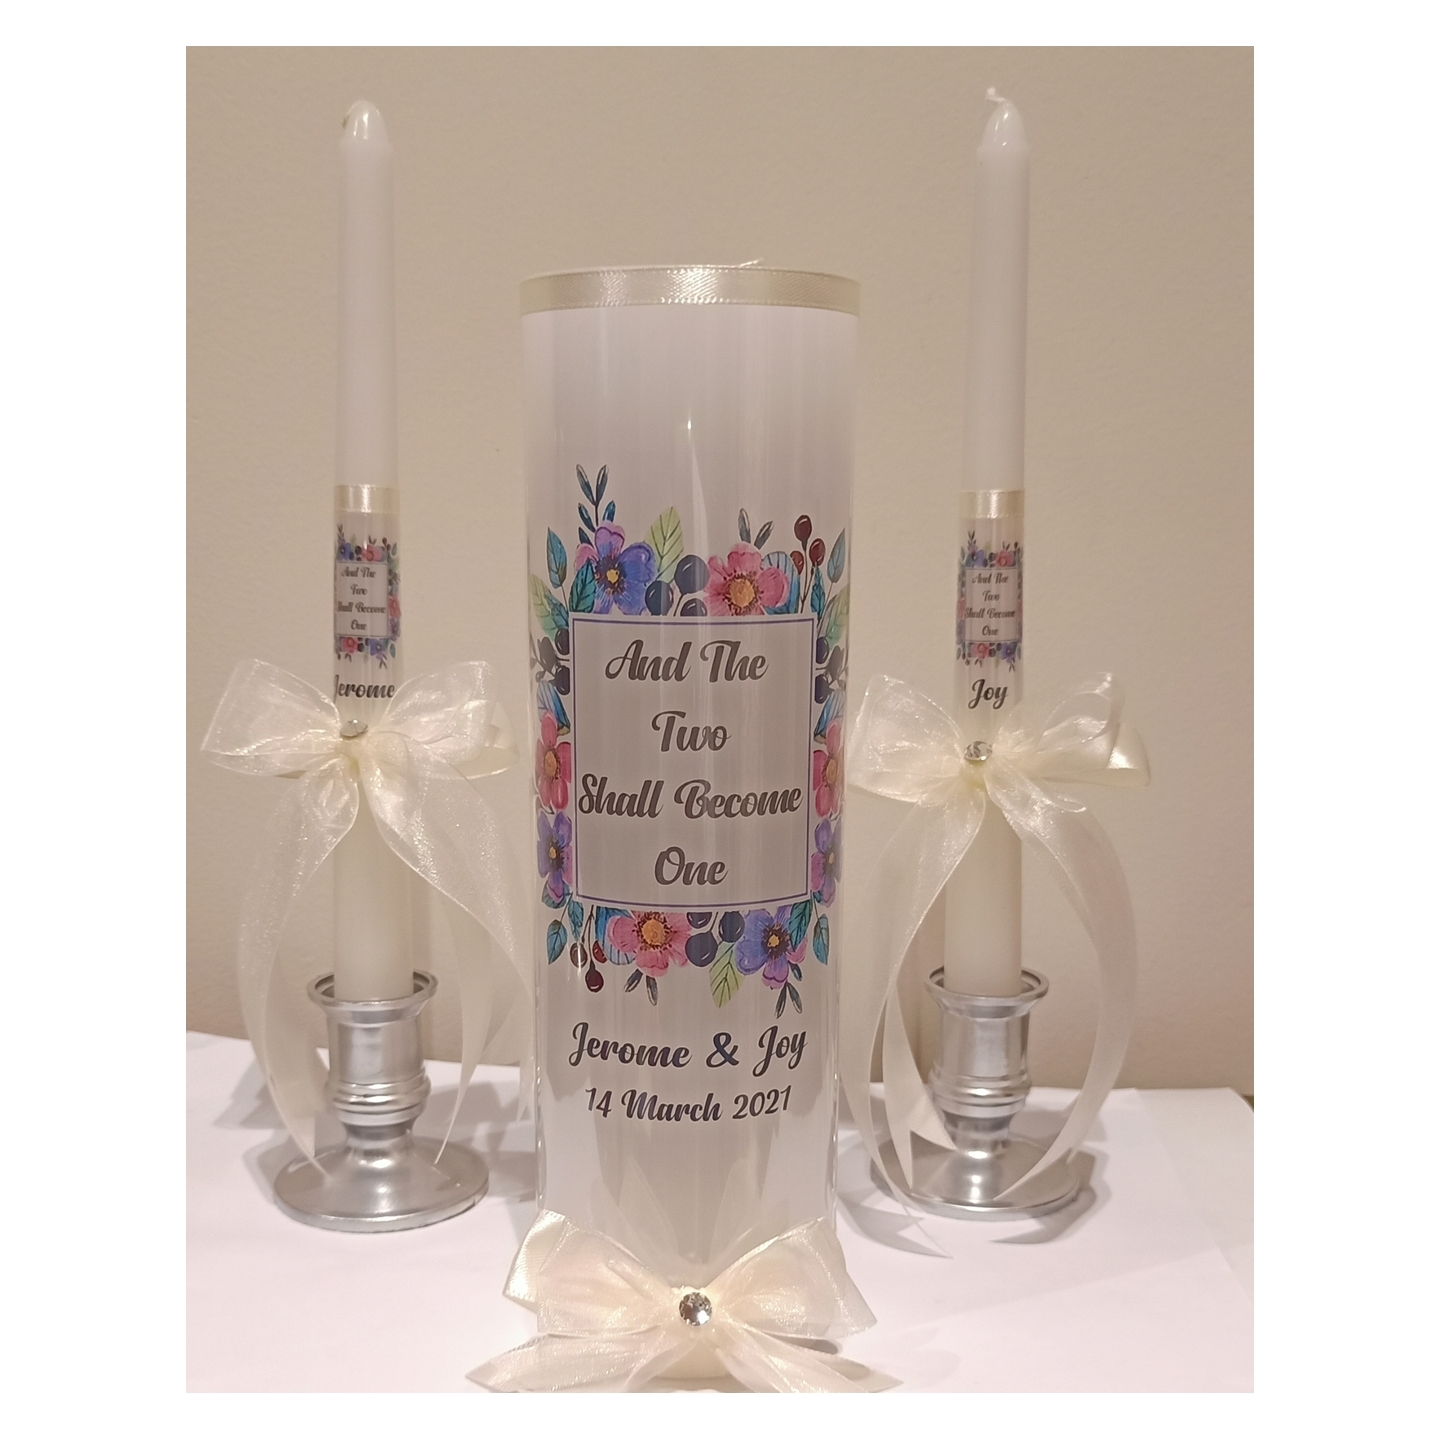 PERSONALIZED UNITY CANDLES FLORAL SQUARE FRAME -  And the two shall become one SMGWED2018-002 - Free Shipping